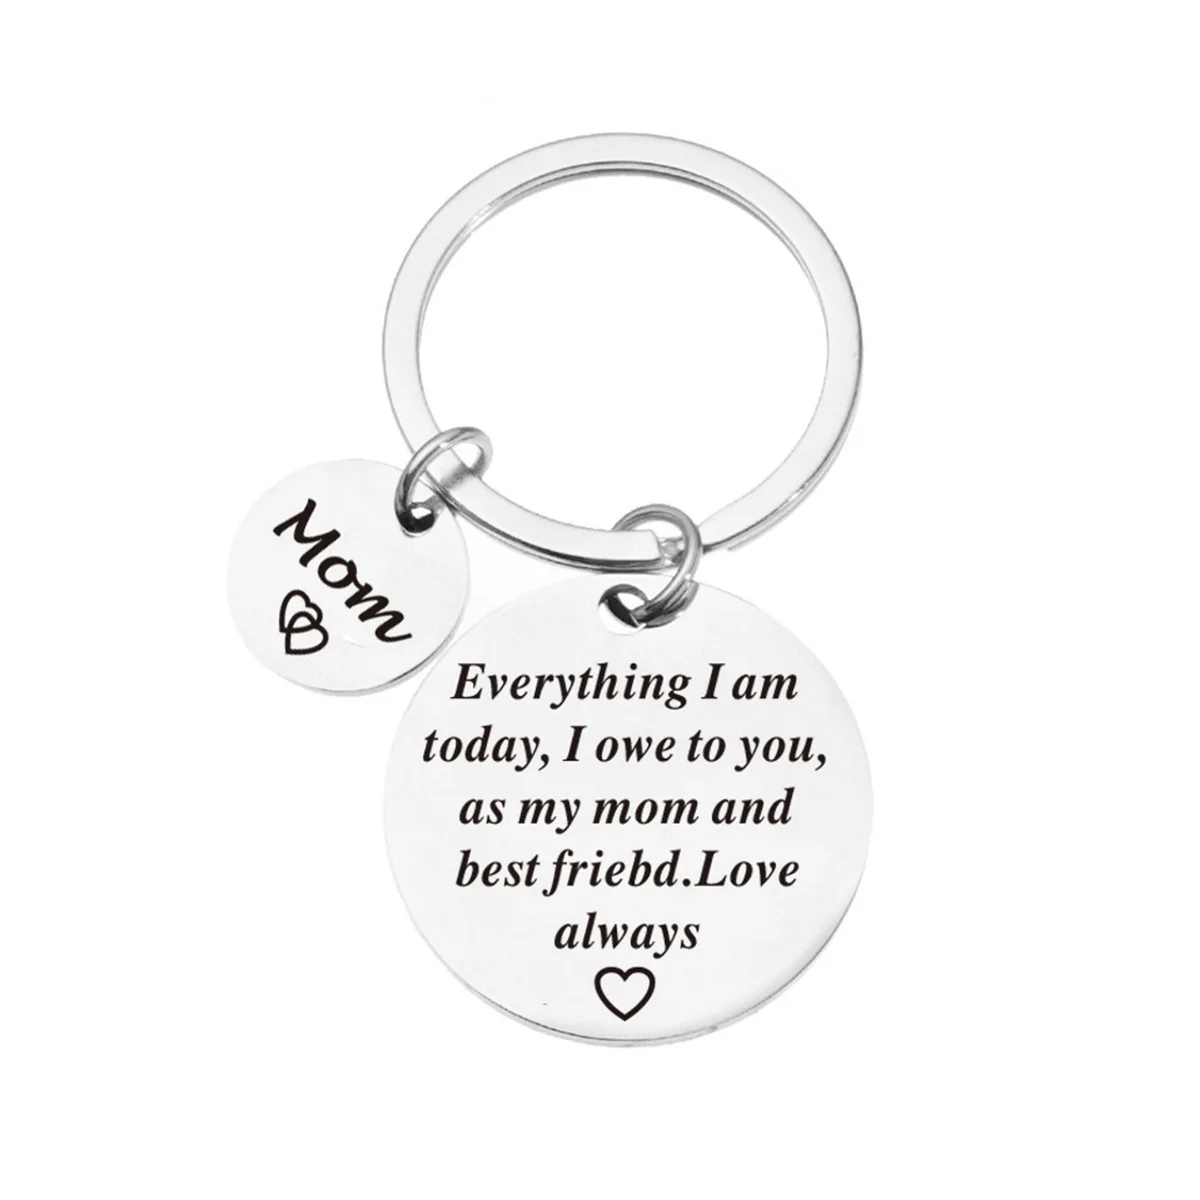 https://ae01.alicdn.com/kf/Sad64fecb6e0143f6b9e857899ab4f25af/Mother-Day-Keychain-Mom-Birthday-Gifts-From-Daughter-Keychain-As-My-Mom-and-Best-Friend-Love.jpg